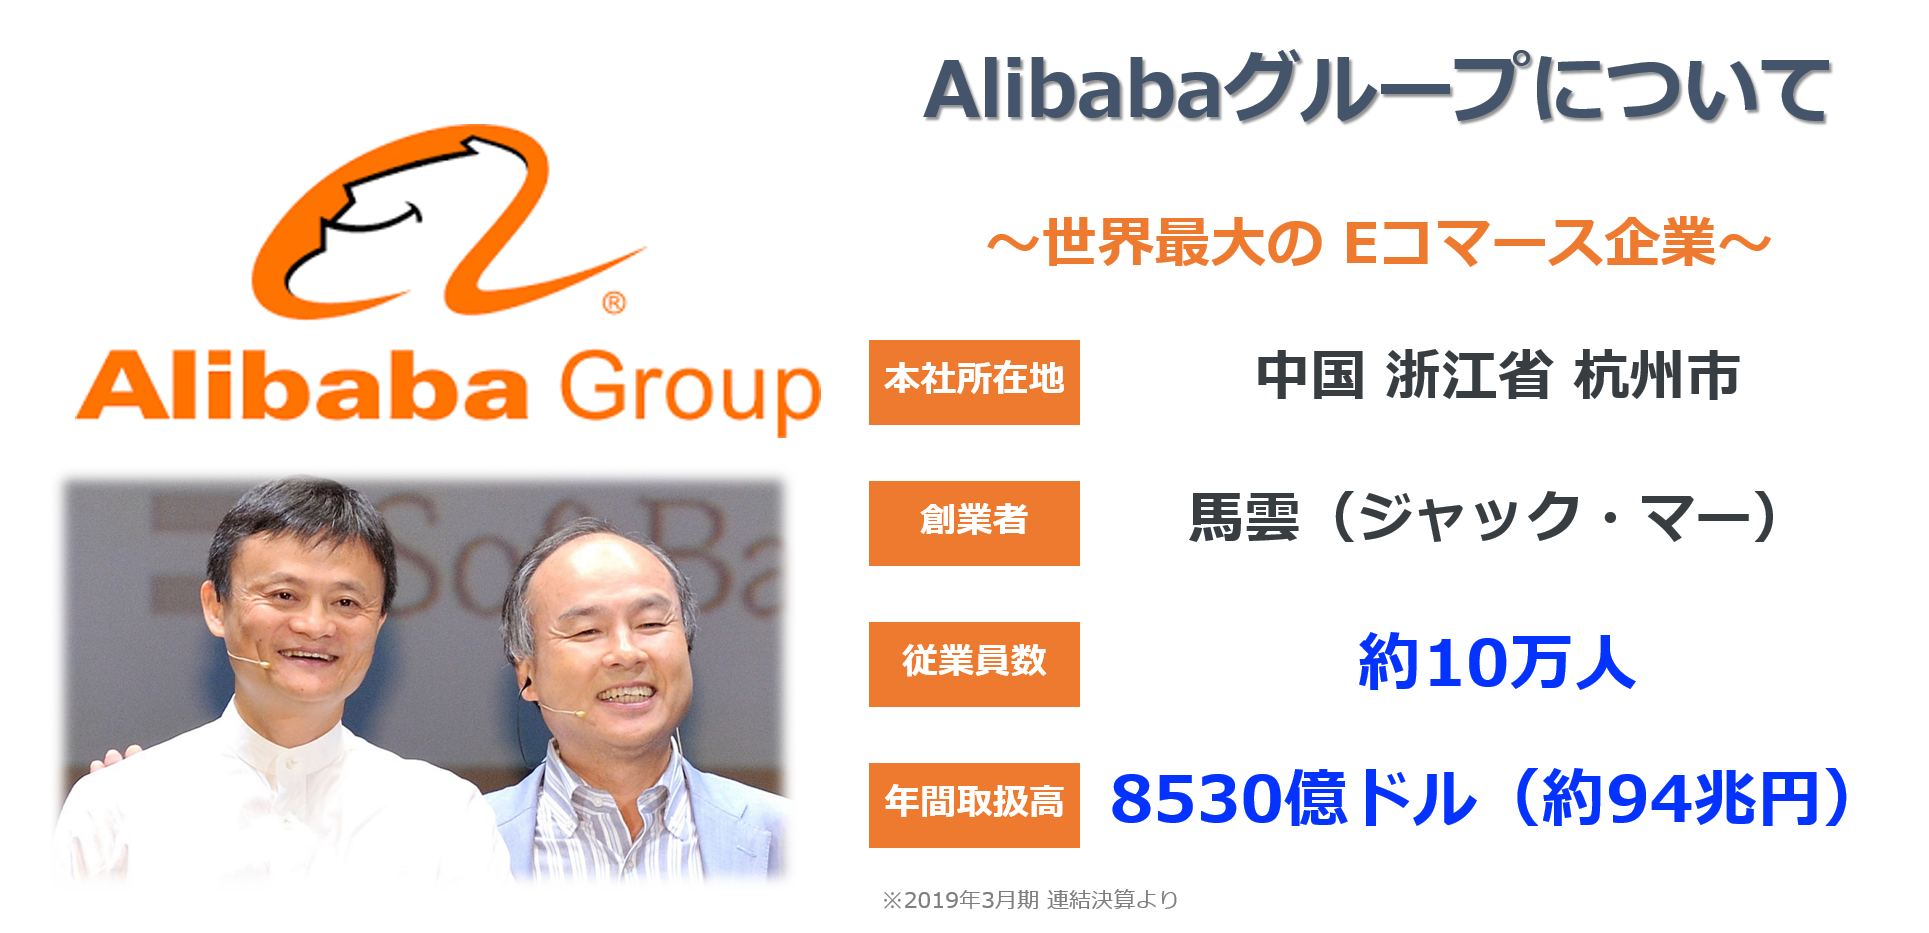 What is Alibaba Group